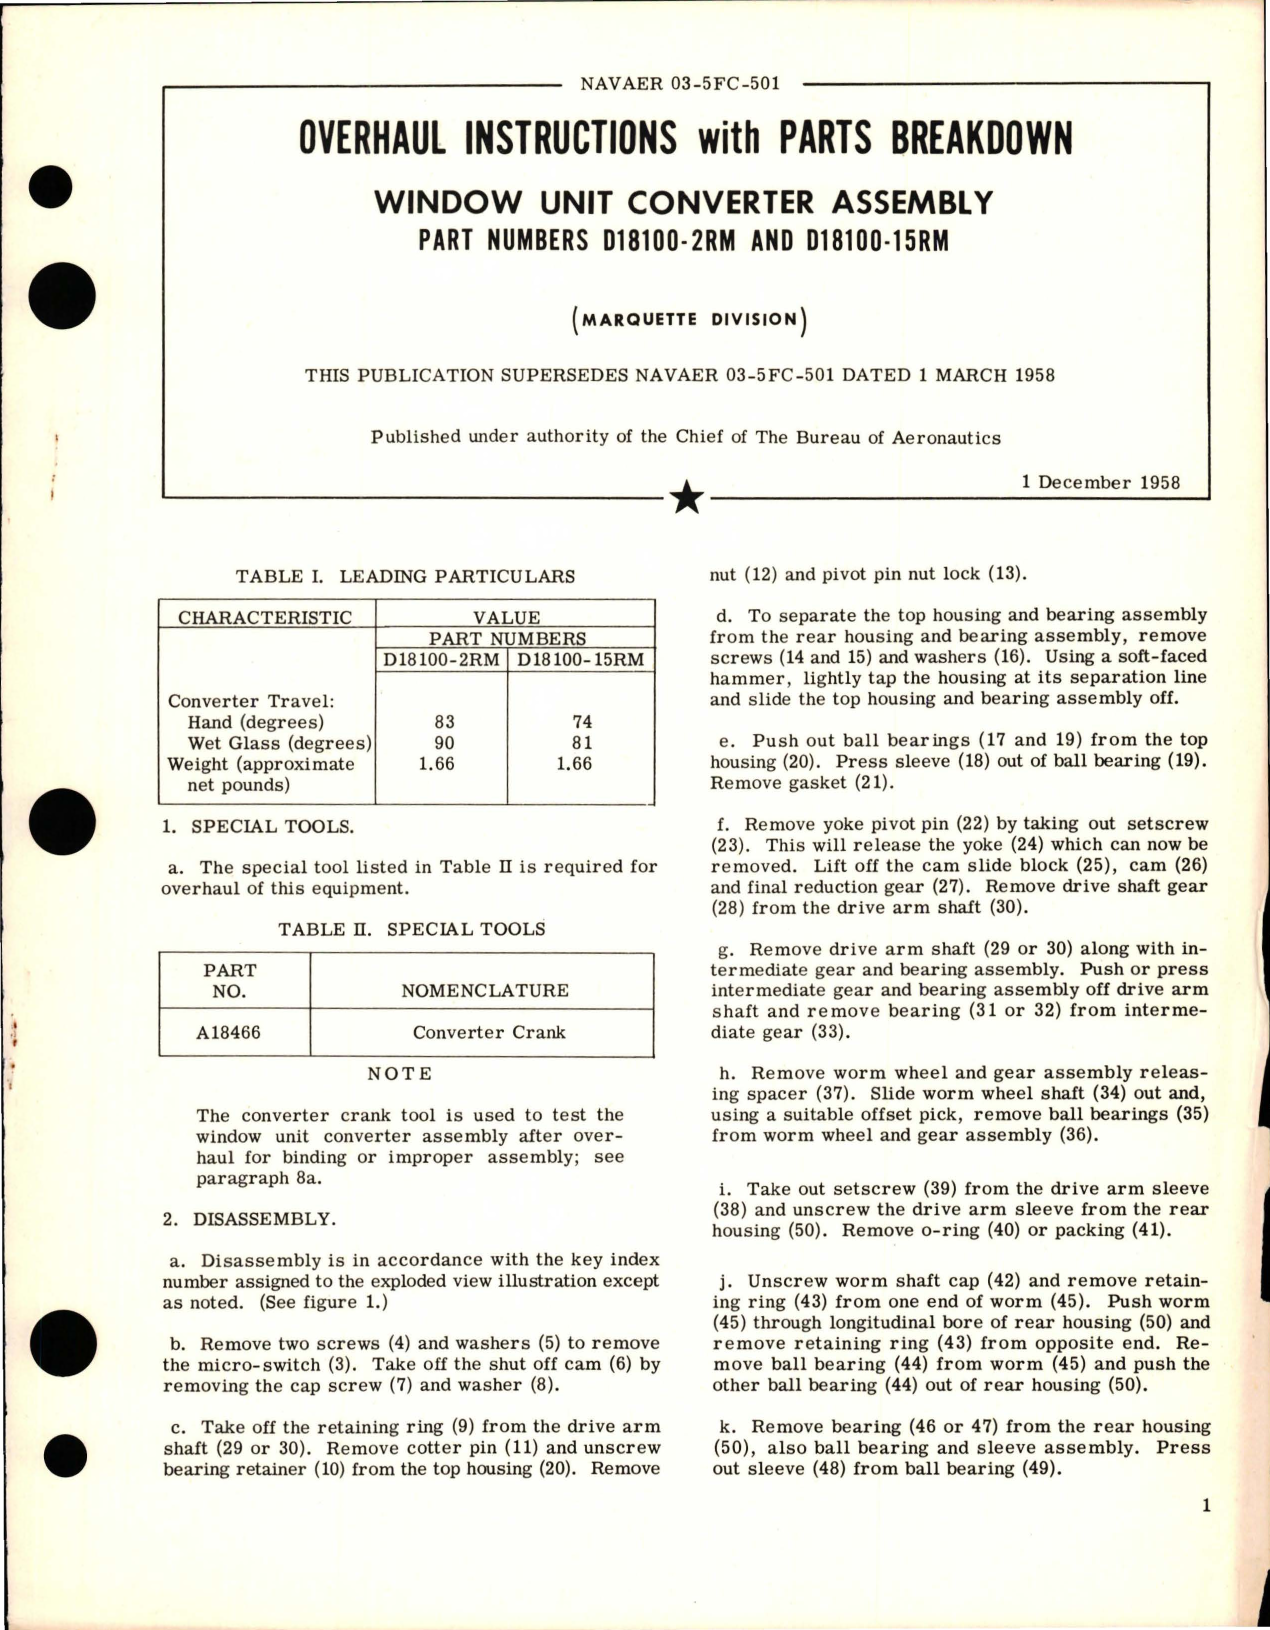 Sample page 1 from AirCorps Library document: Overhaul Instructions with Parts Breakdown for Window Unit Converter Assembly - Parts D18100-2RM and D18100-15RM